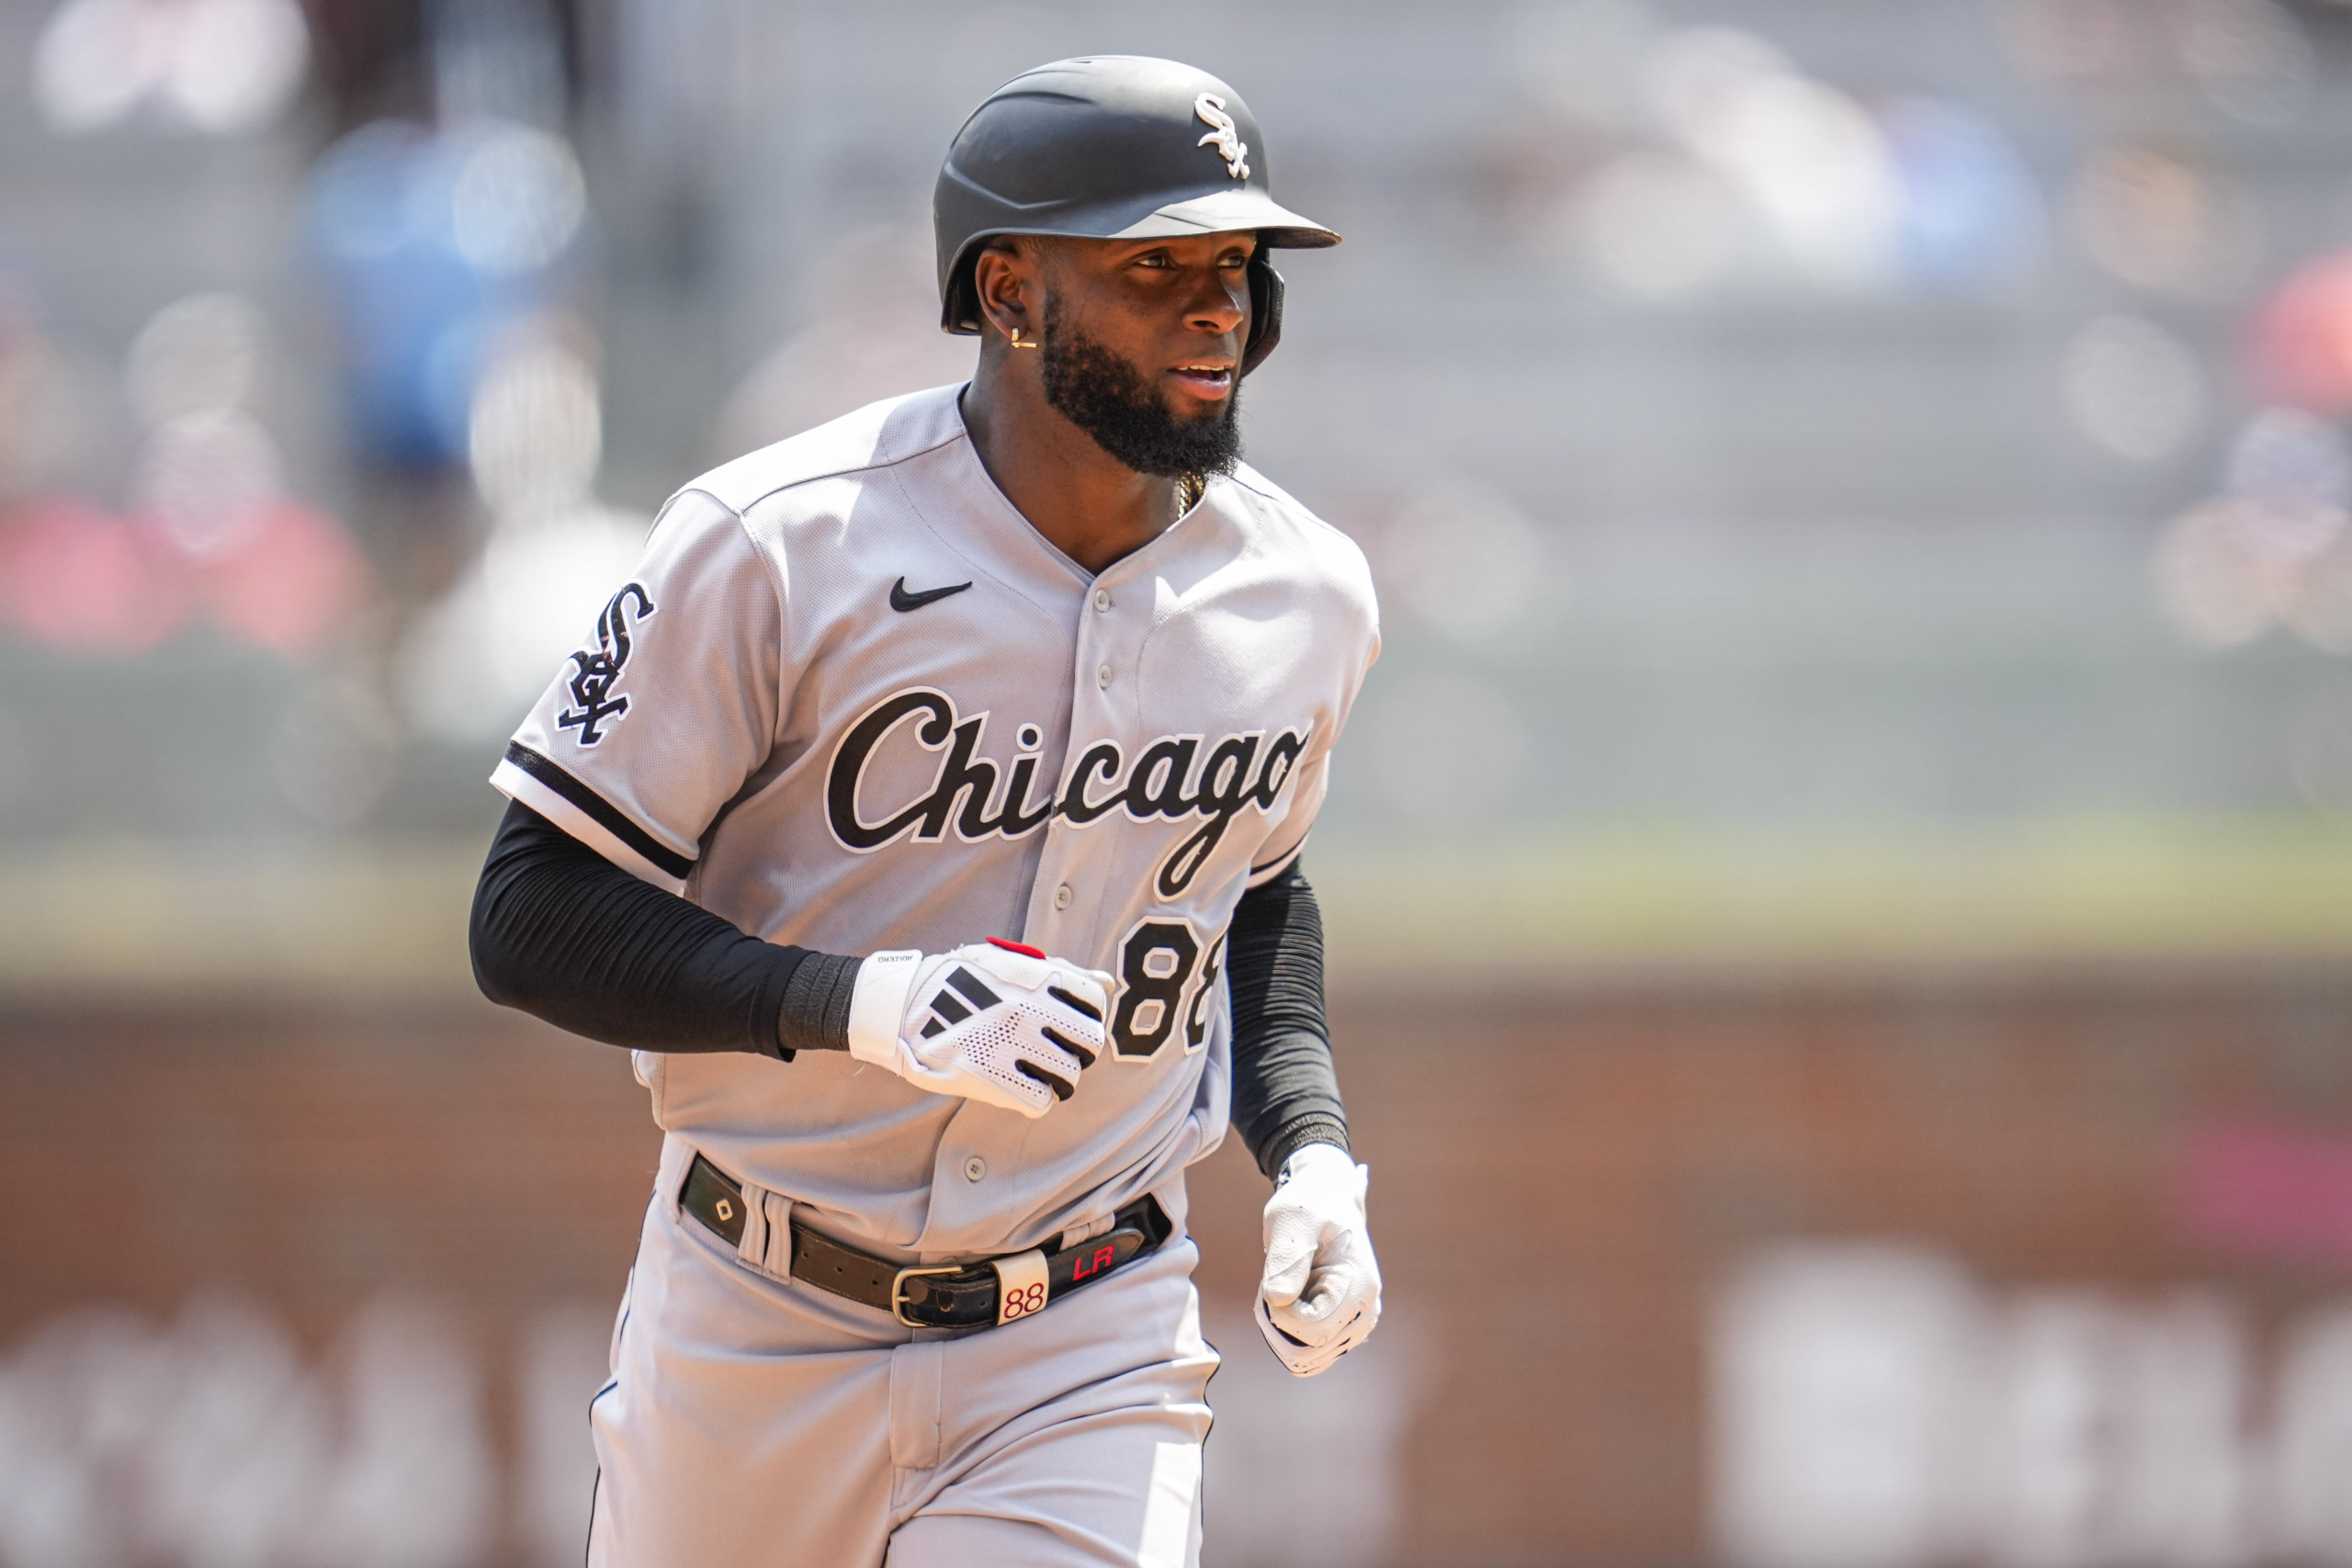 Luis Robert Jr. is a star for White Sox